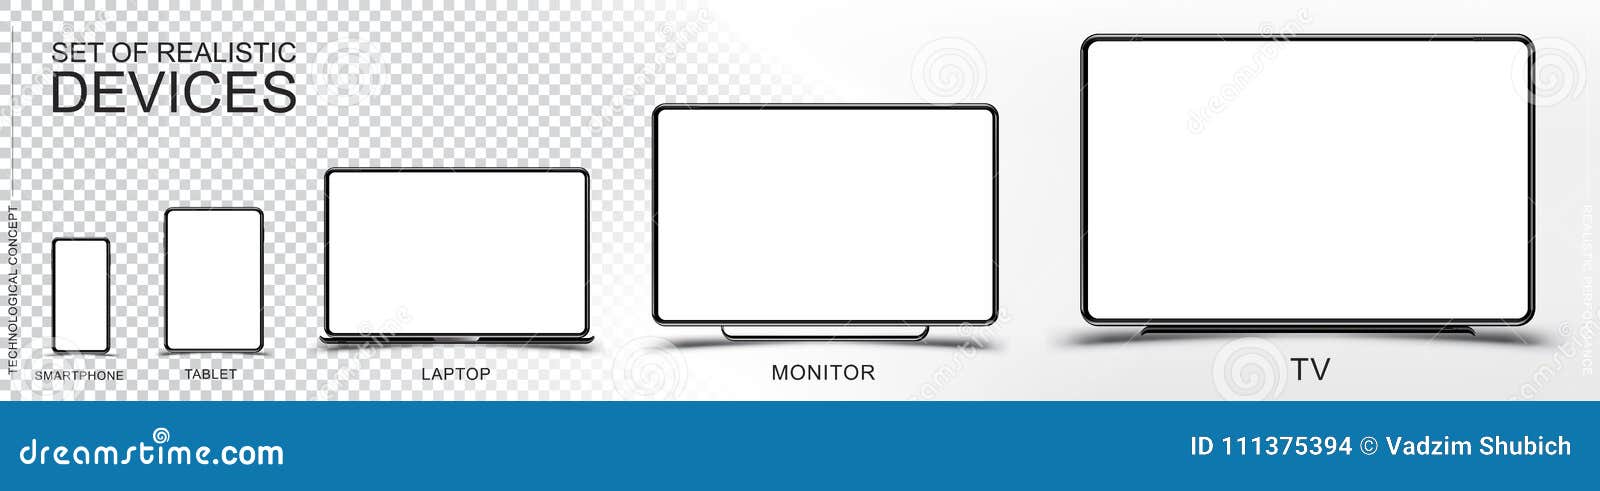 set mock-up of realistic devices. smartphone, tablet, laptop, monitor and tv on a transparent and white background. flat  il